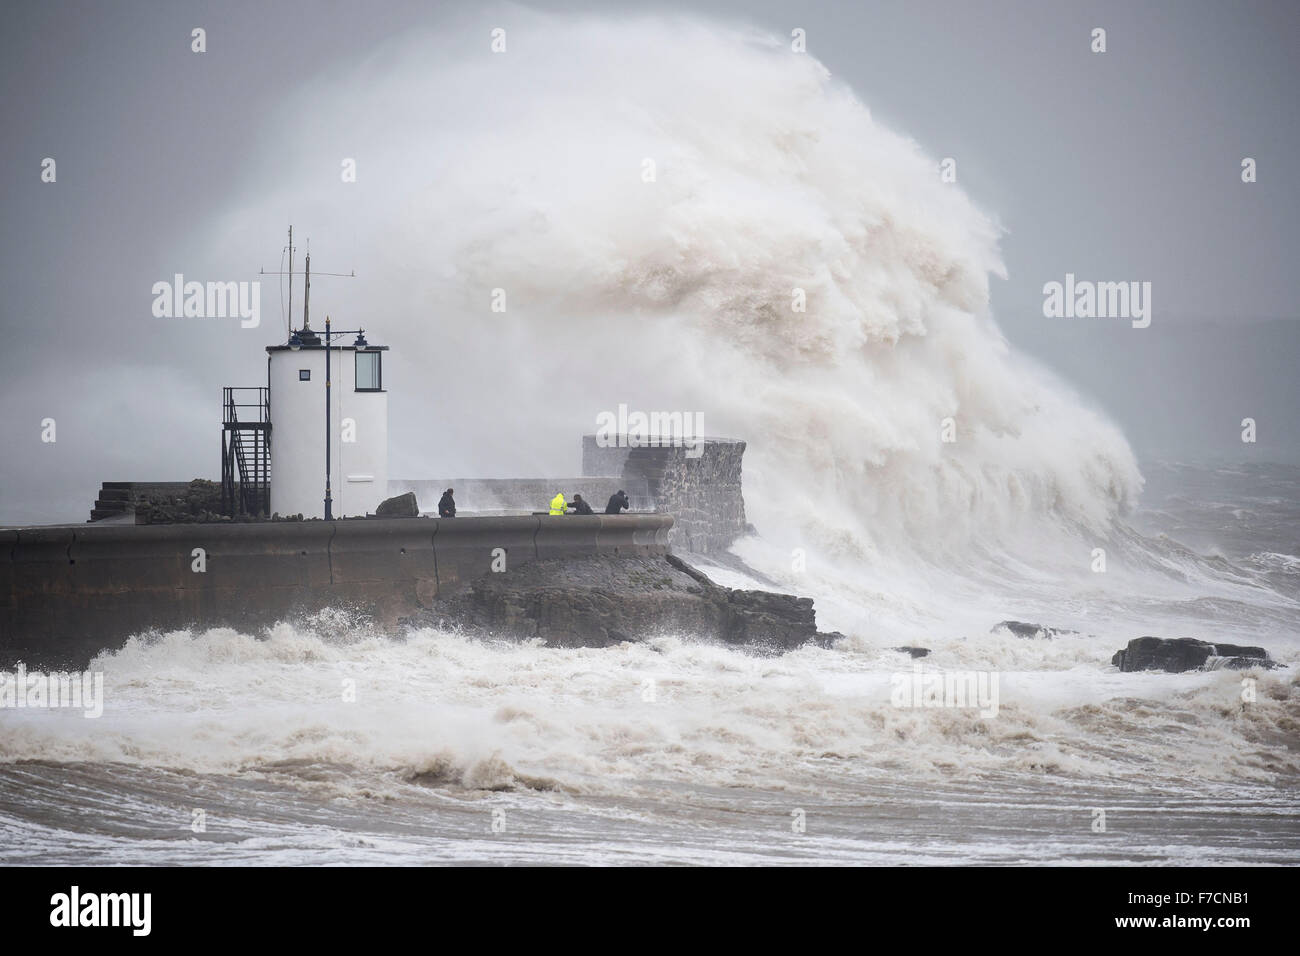 Large waves crash against the harbour wall in Porthcawl, South Wales, as storm Clodagh sweeps across South Wales. Stock Photo